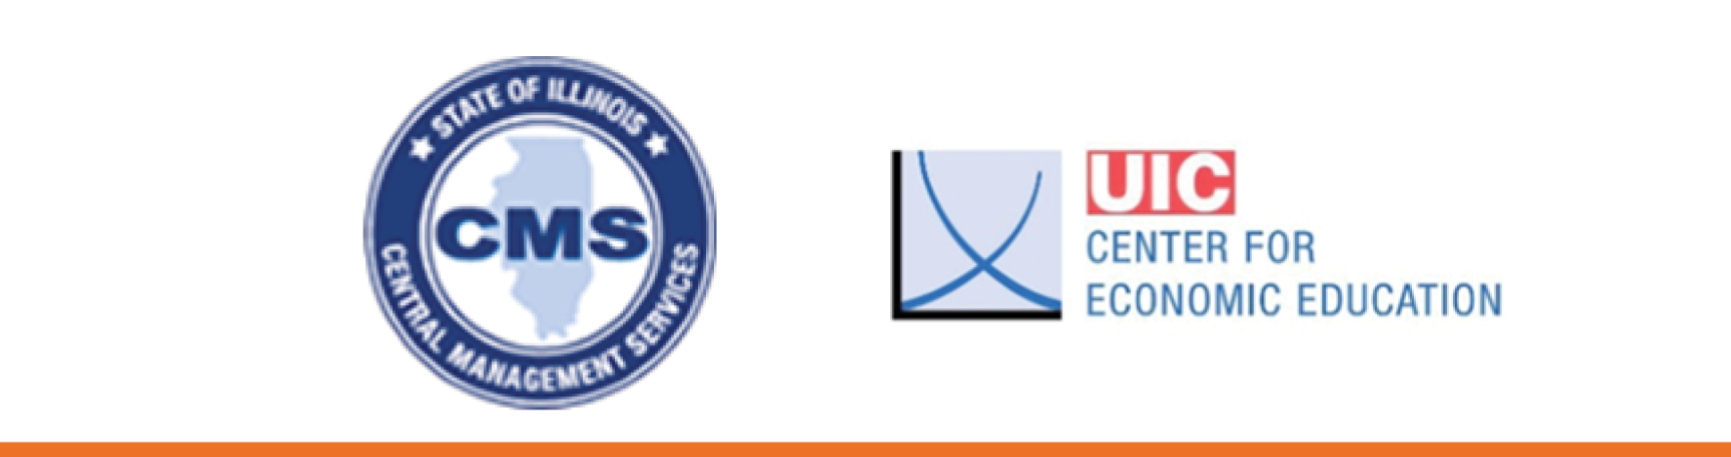 Partner Logos, CMS and UIC Center for Economic Education